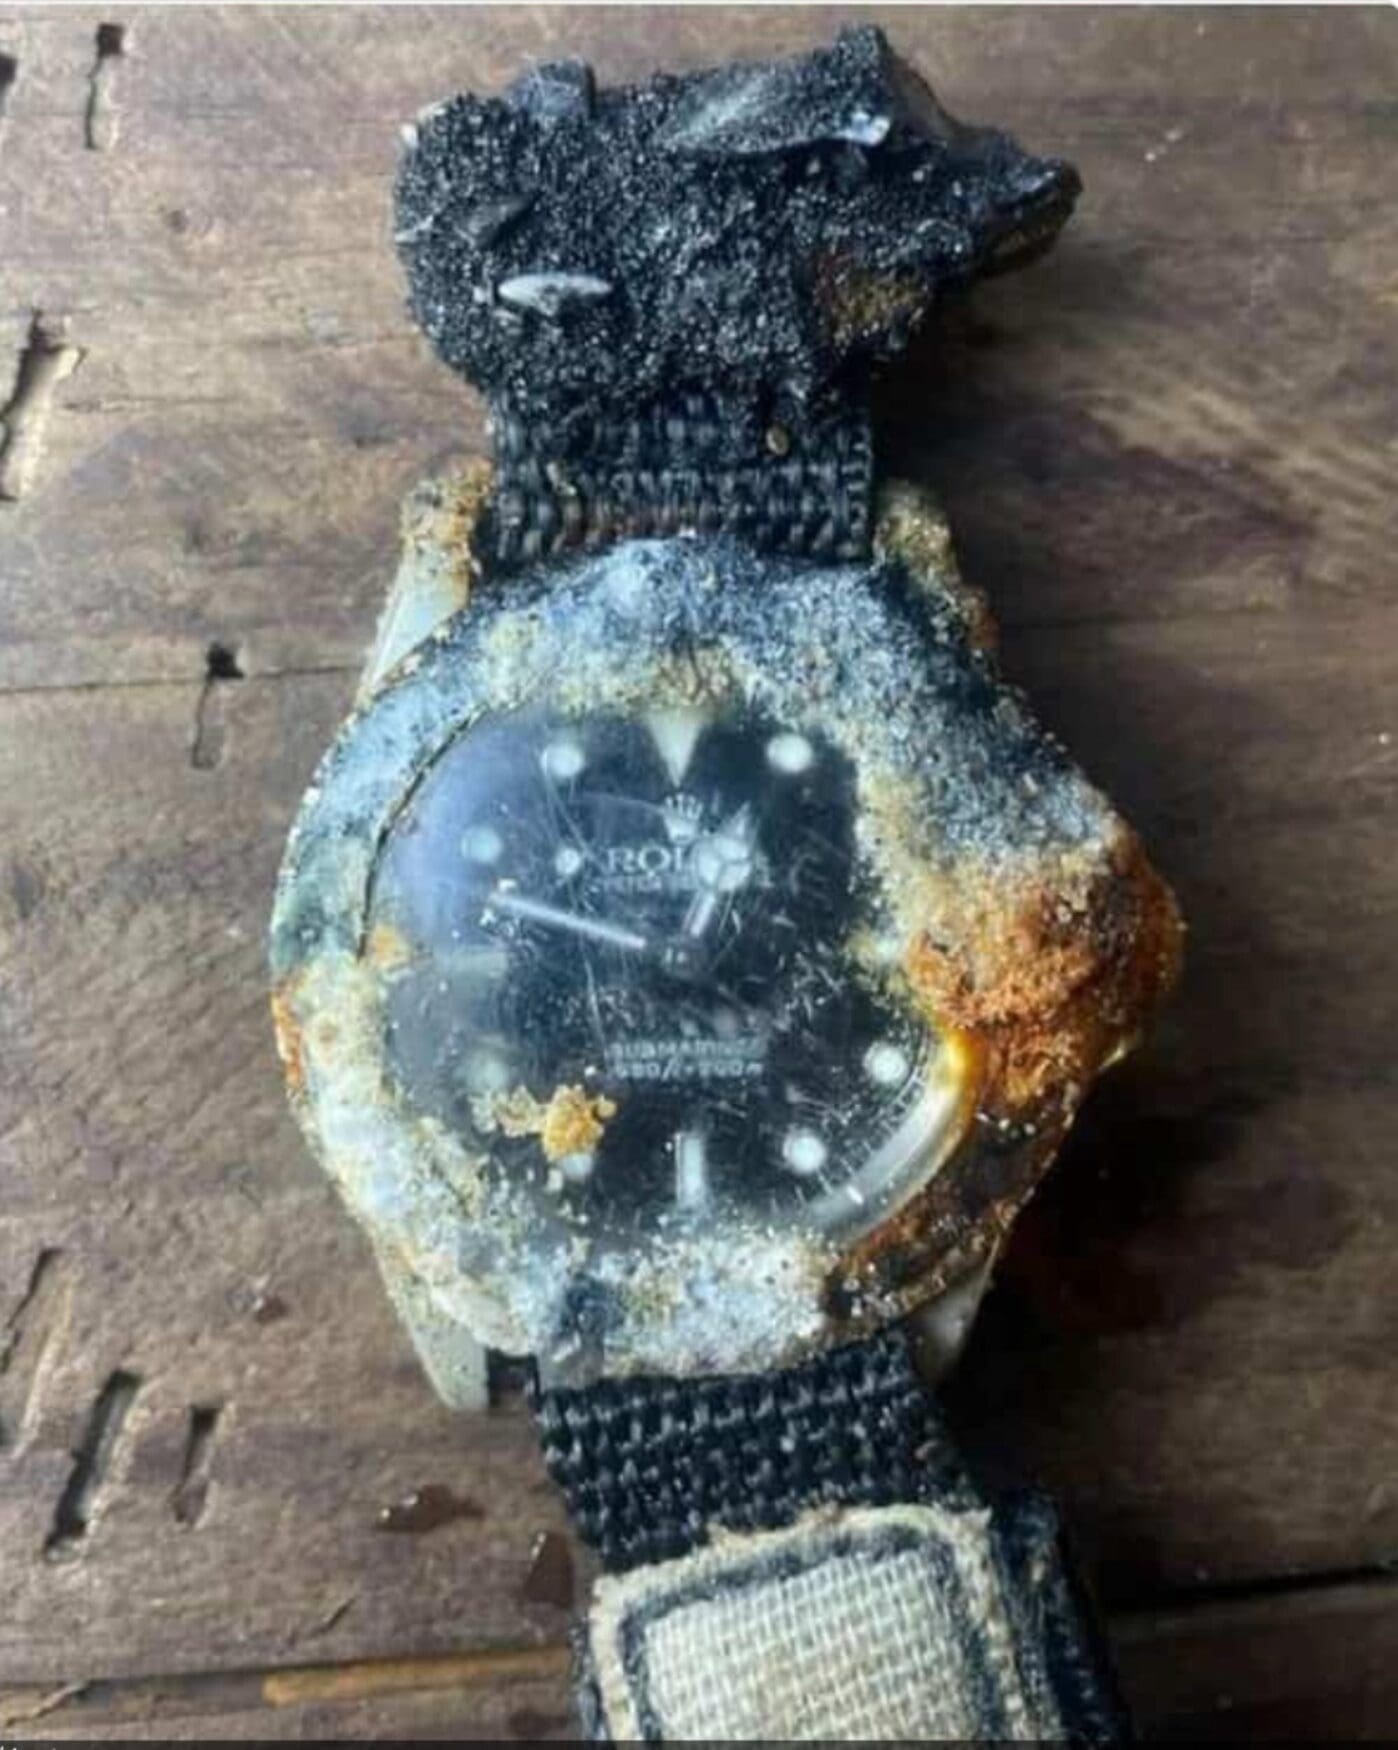 When “tropical” and “ghost bezel” don’t cut it. Describe the condition of this Rolex salvaged from the bottom of the ocean